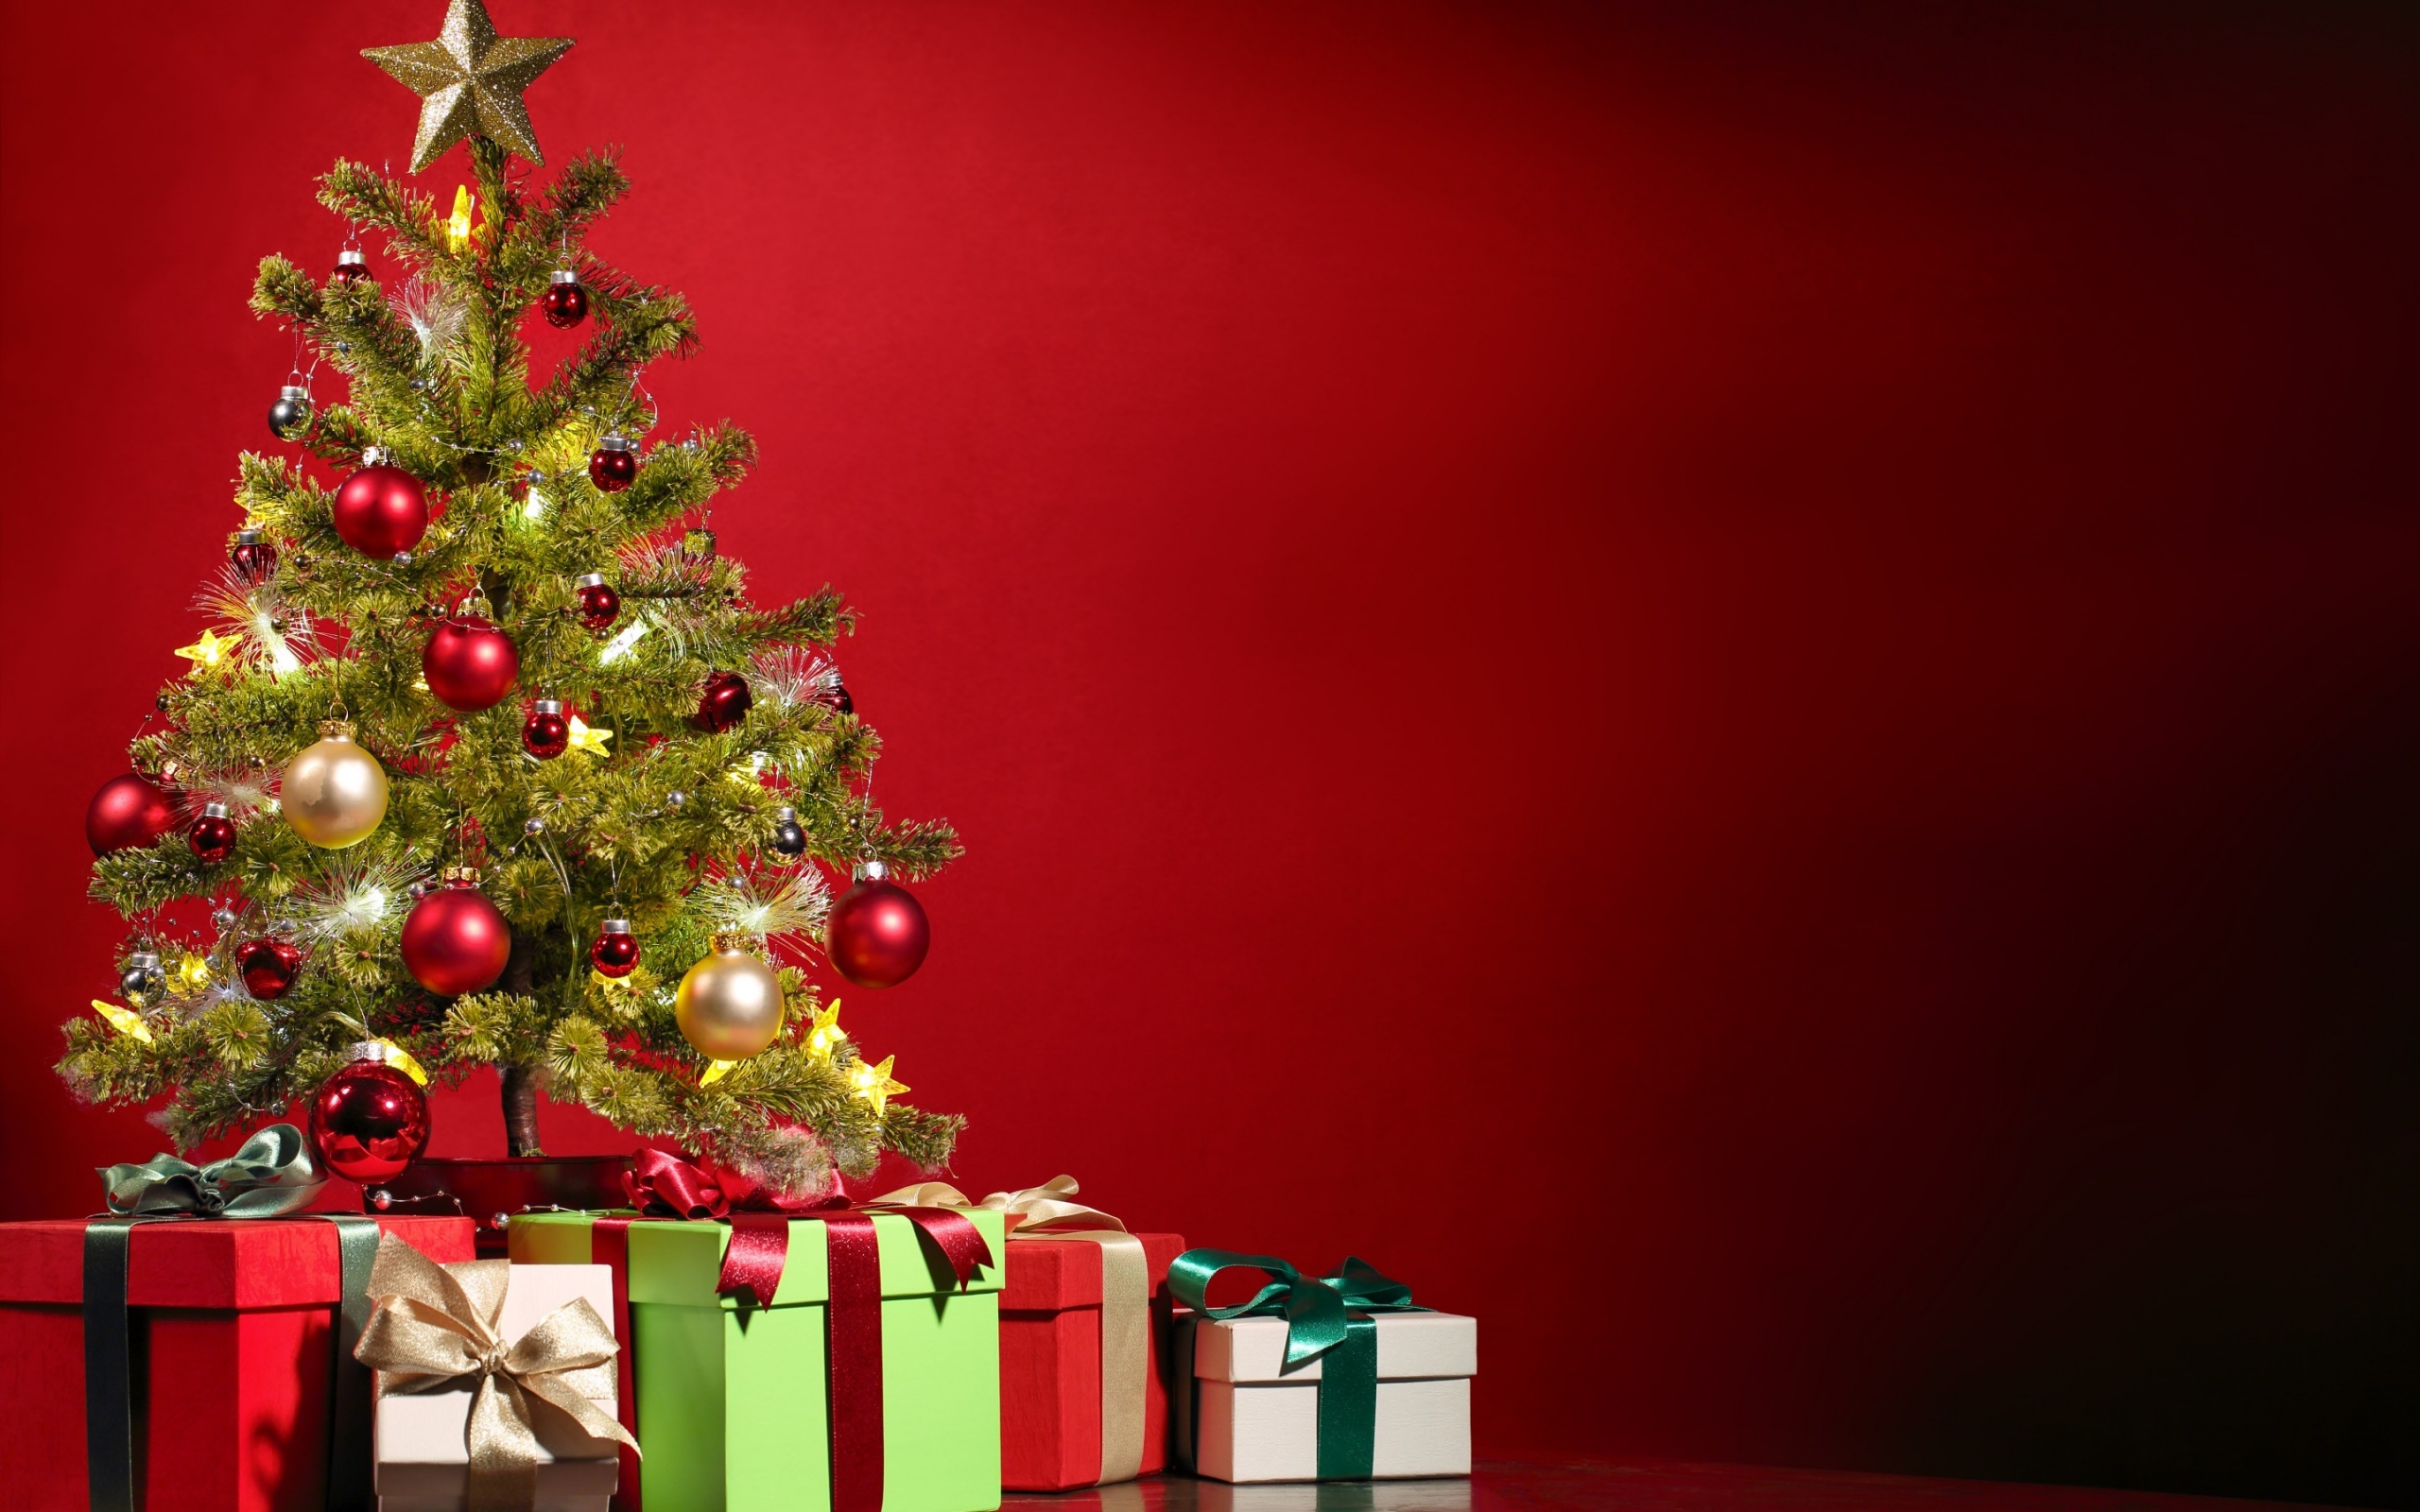 Special Christmas Tree and Gifts for 2560 x 1600 widescreen resolution